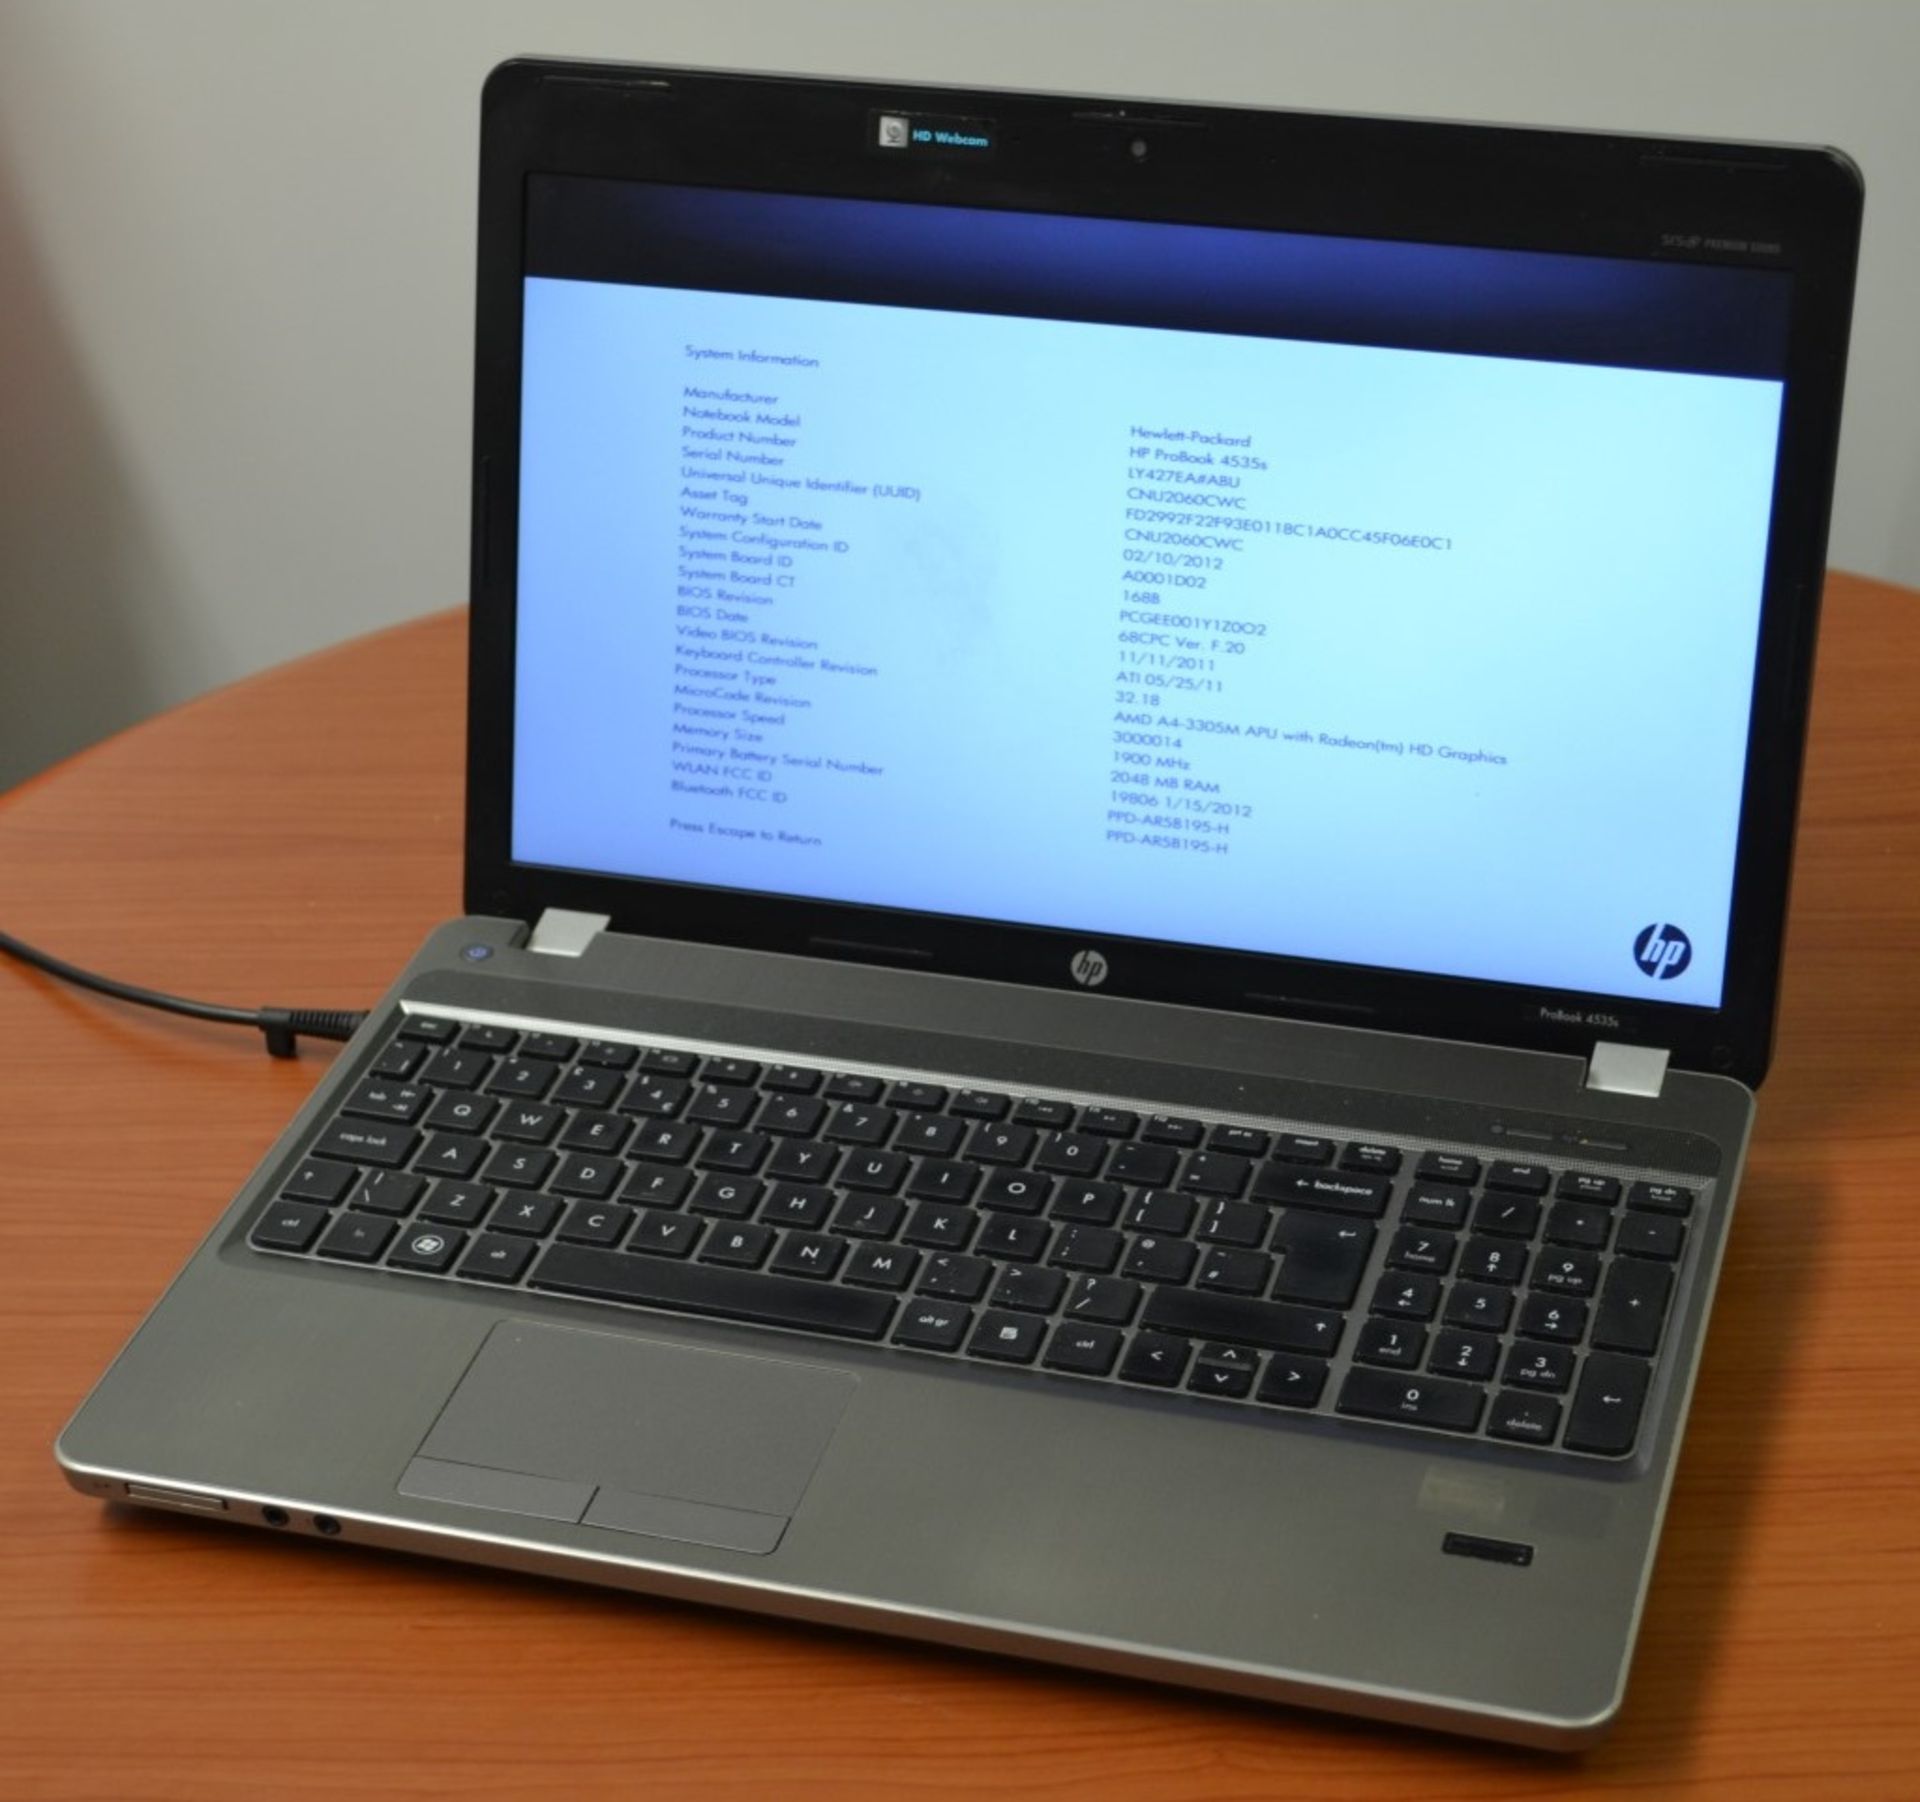 1 x HP Probook 4535s Laptop Computer - 15.6 Inch Screen Size - Features  AMD A4-3305M Dual Core